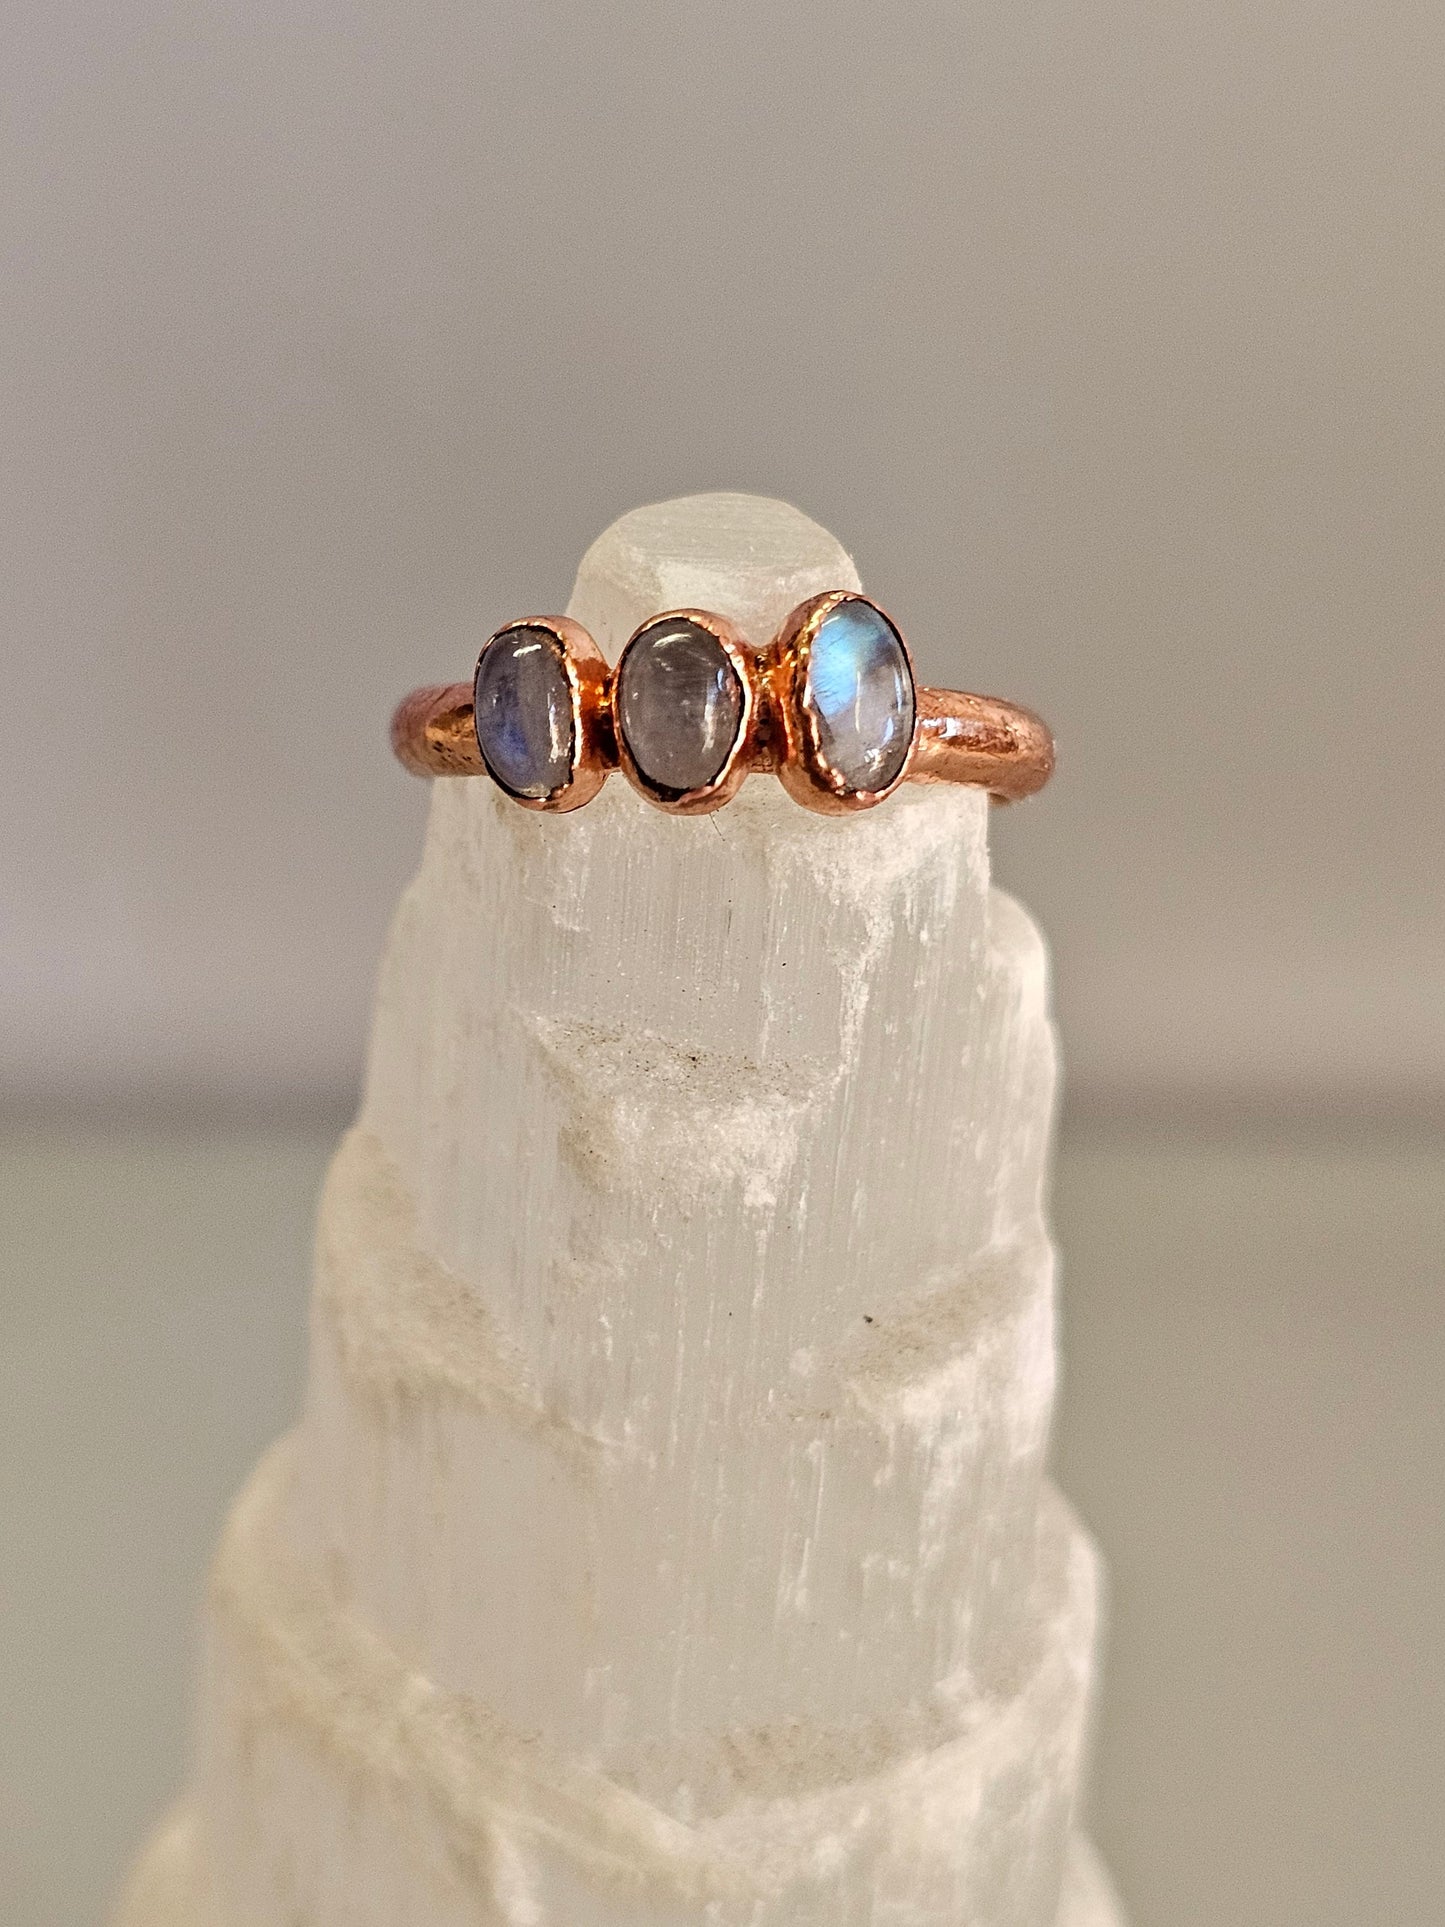 Load image into Gallery viewer, Moonstone Stacking Crystal Dainty Ring Copper Electroformed in Rose Gold with Moonstone, Gemstone Jewelry Gift for Her
